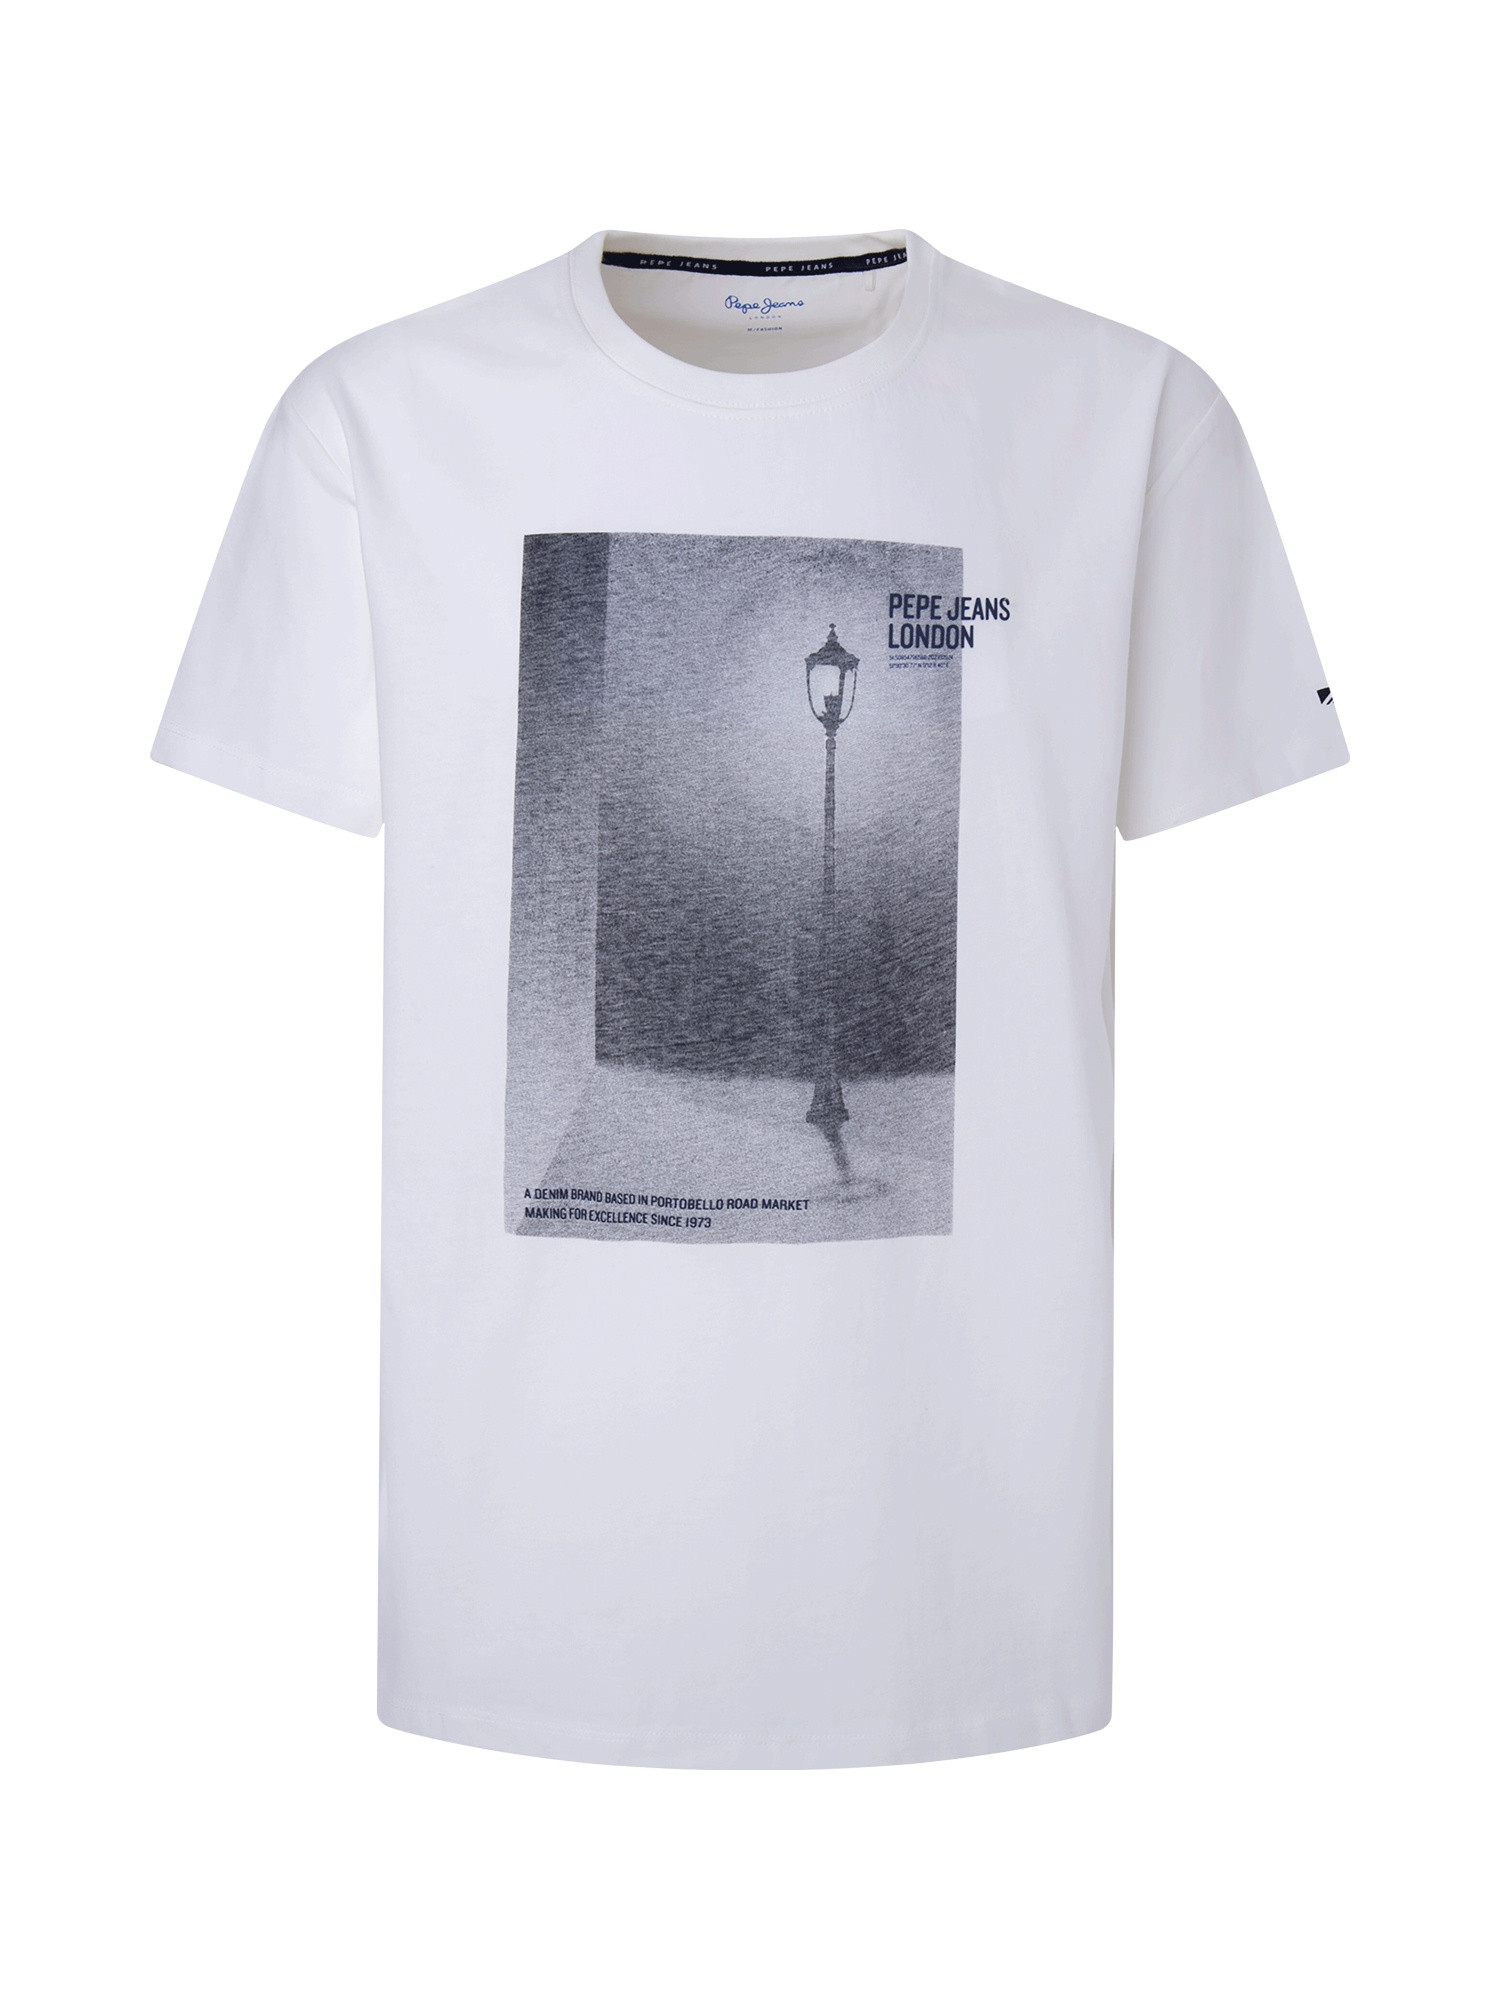 Pepe Jeans - T-shirt con stampa fotografica in cotone, Bianco, large image number 0